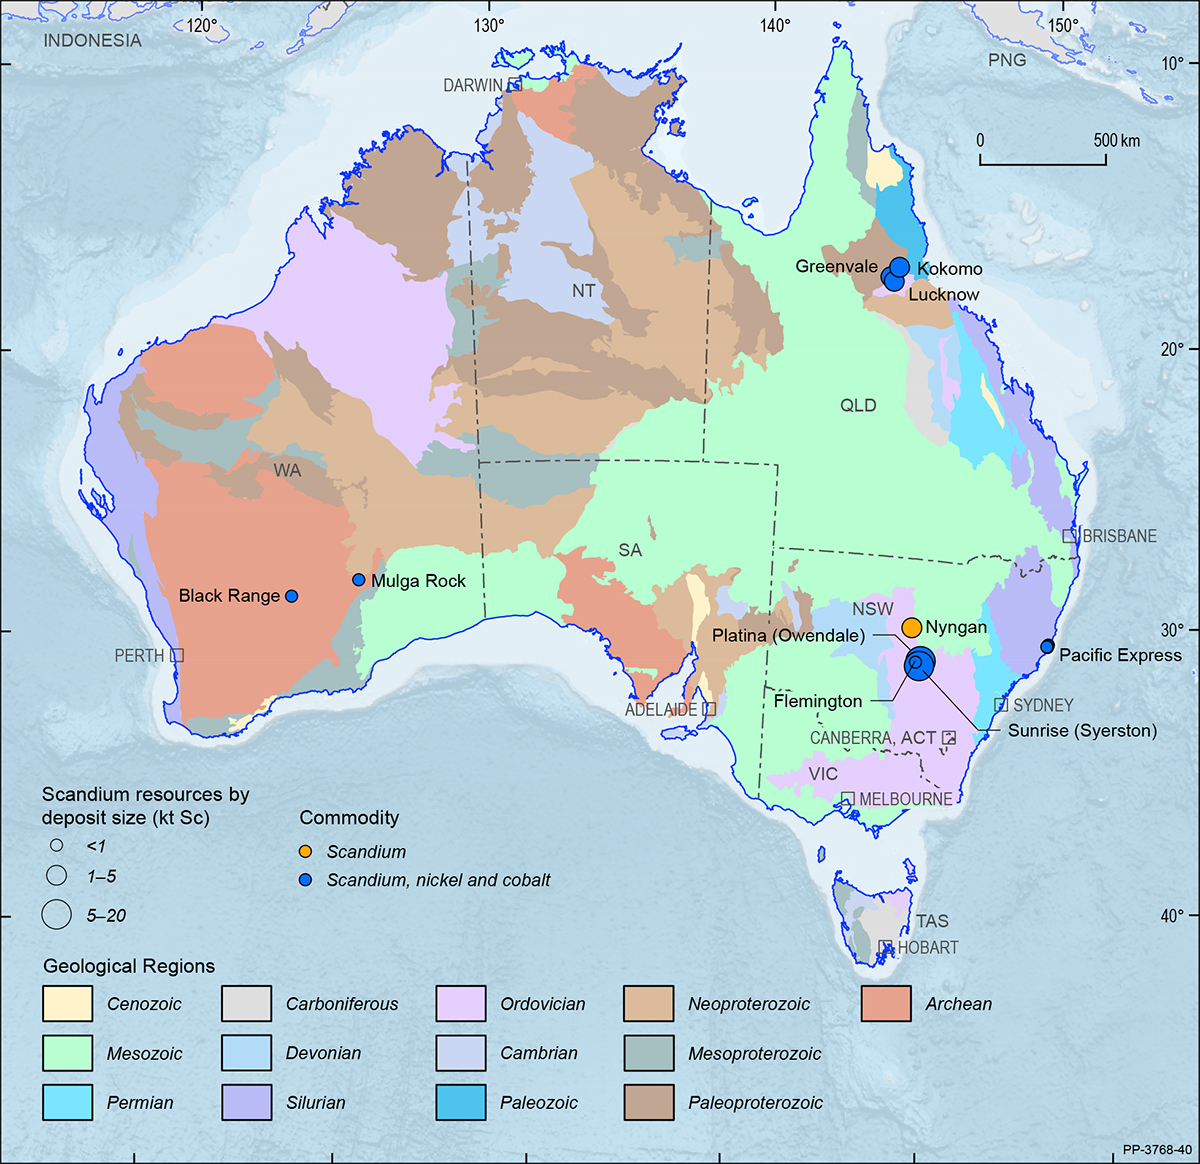 A map showing the Australian continent shaded by the ages of the main geological provinces highlighting the geographical distribution of Australian scandium deposits in 2019.